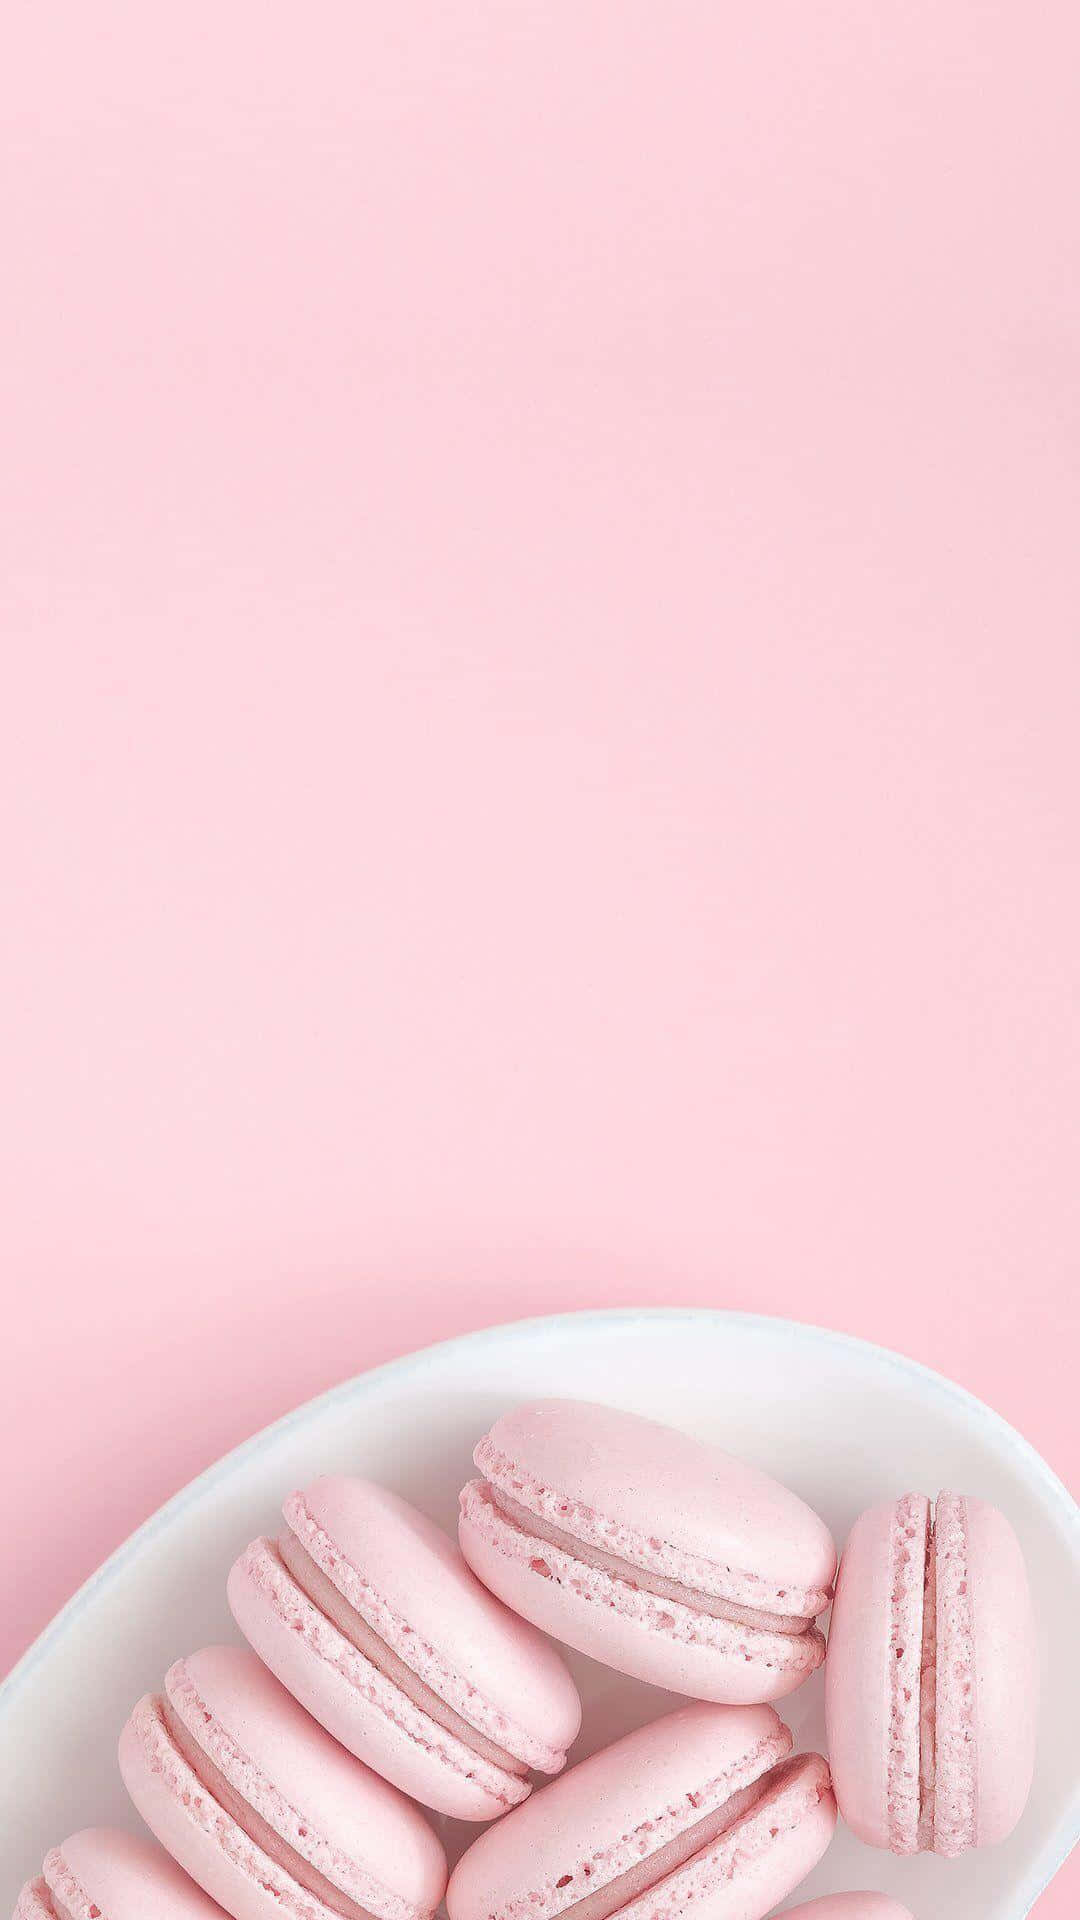 Pink Macarons On A Plate On A Pink Background Background